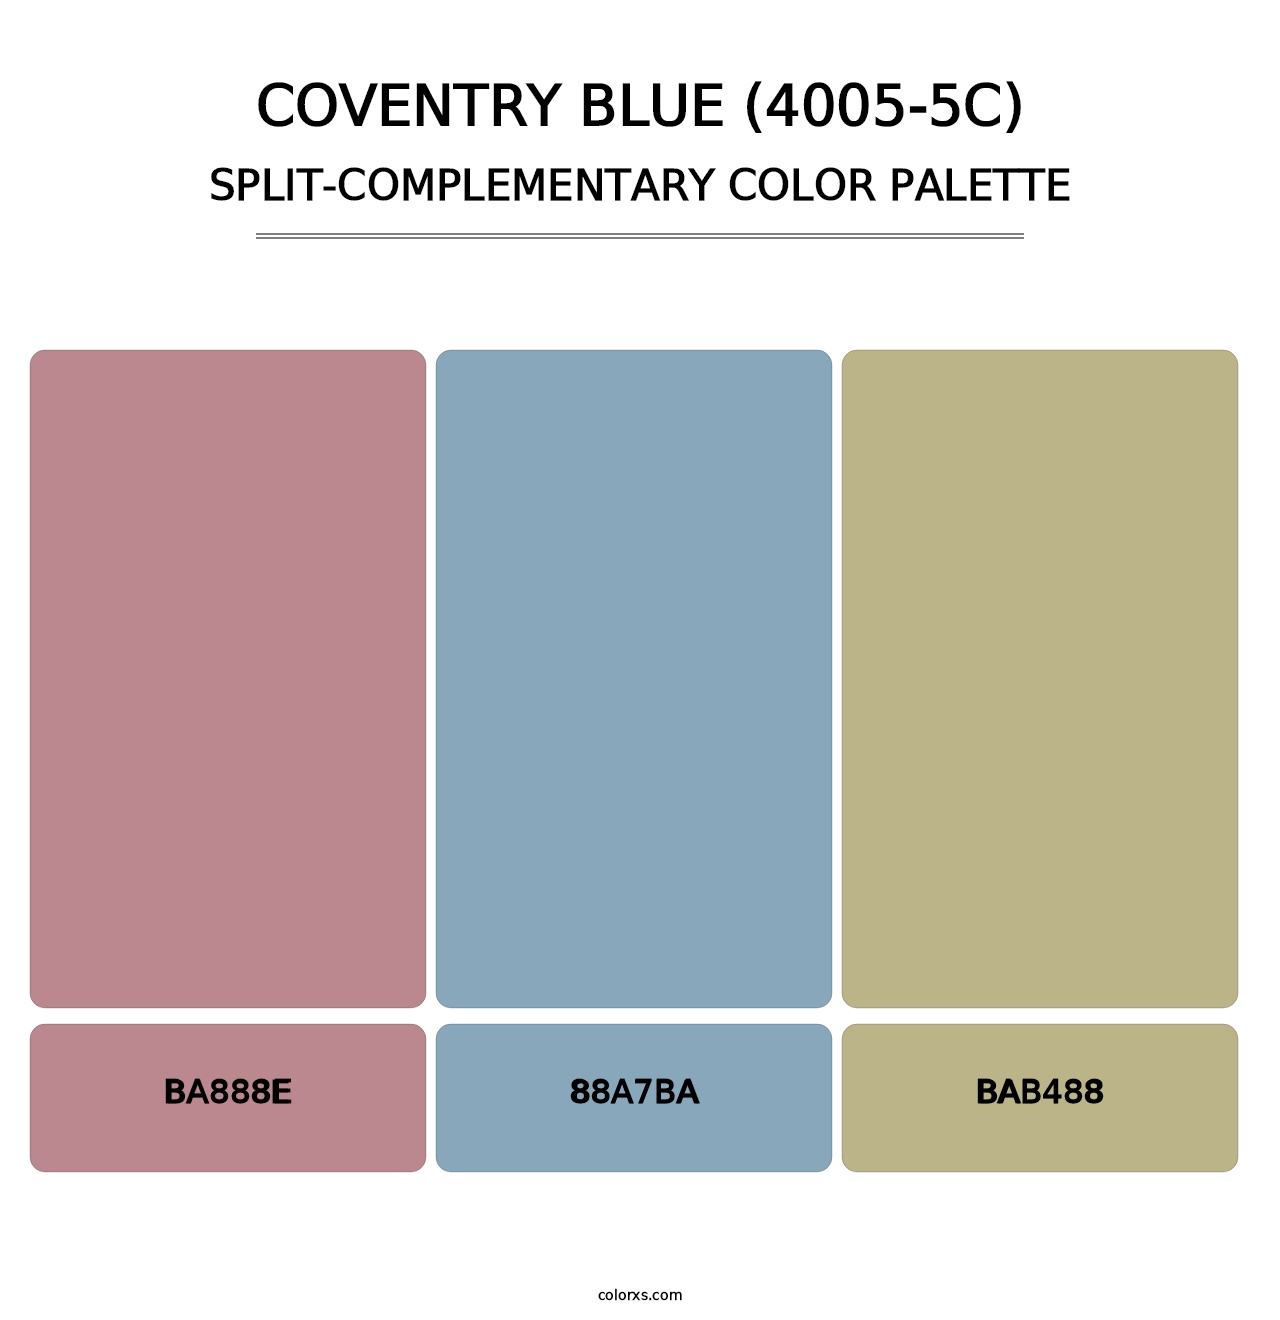 Coventry Blue (4005-5C) - Split-Complementary Color Palette